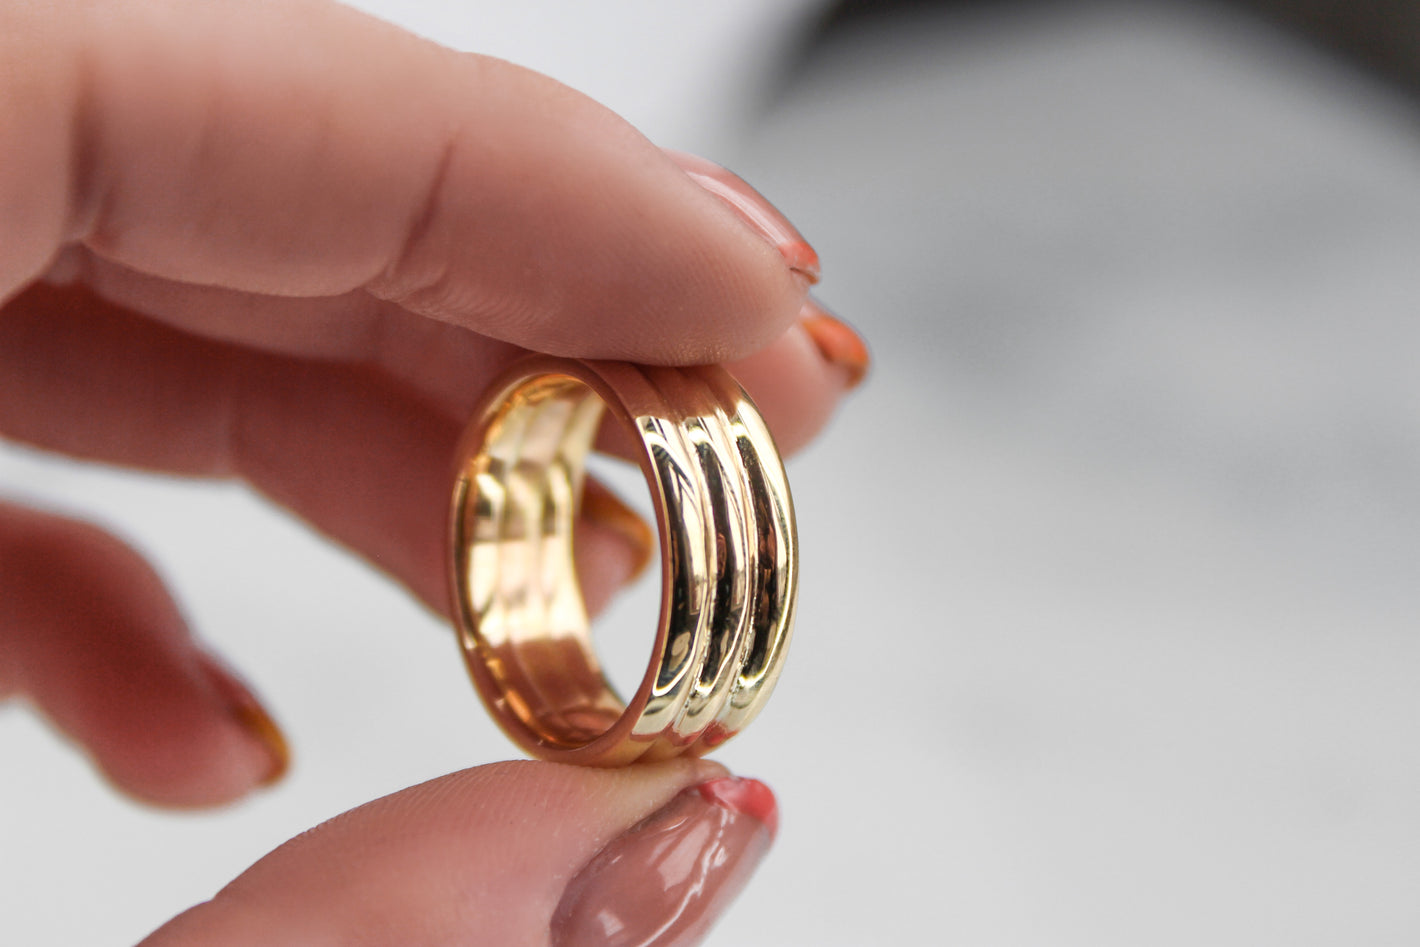 remodelled band ring from melted down sustainable gold